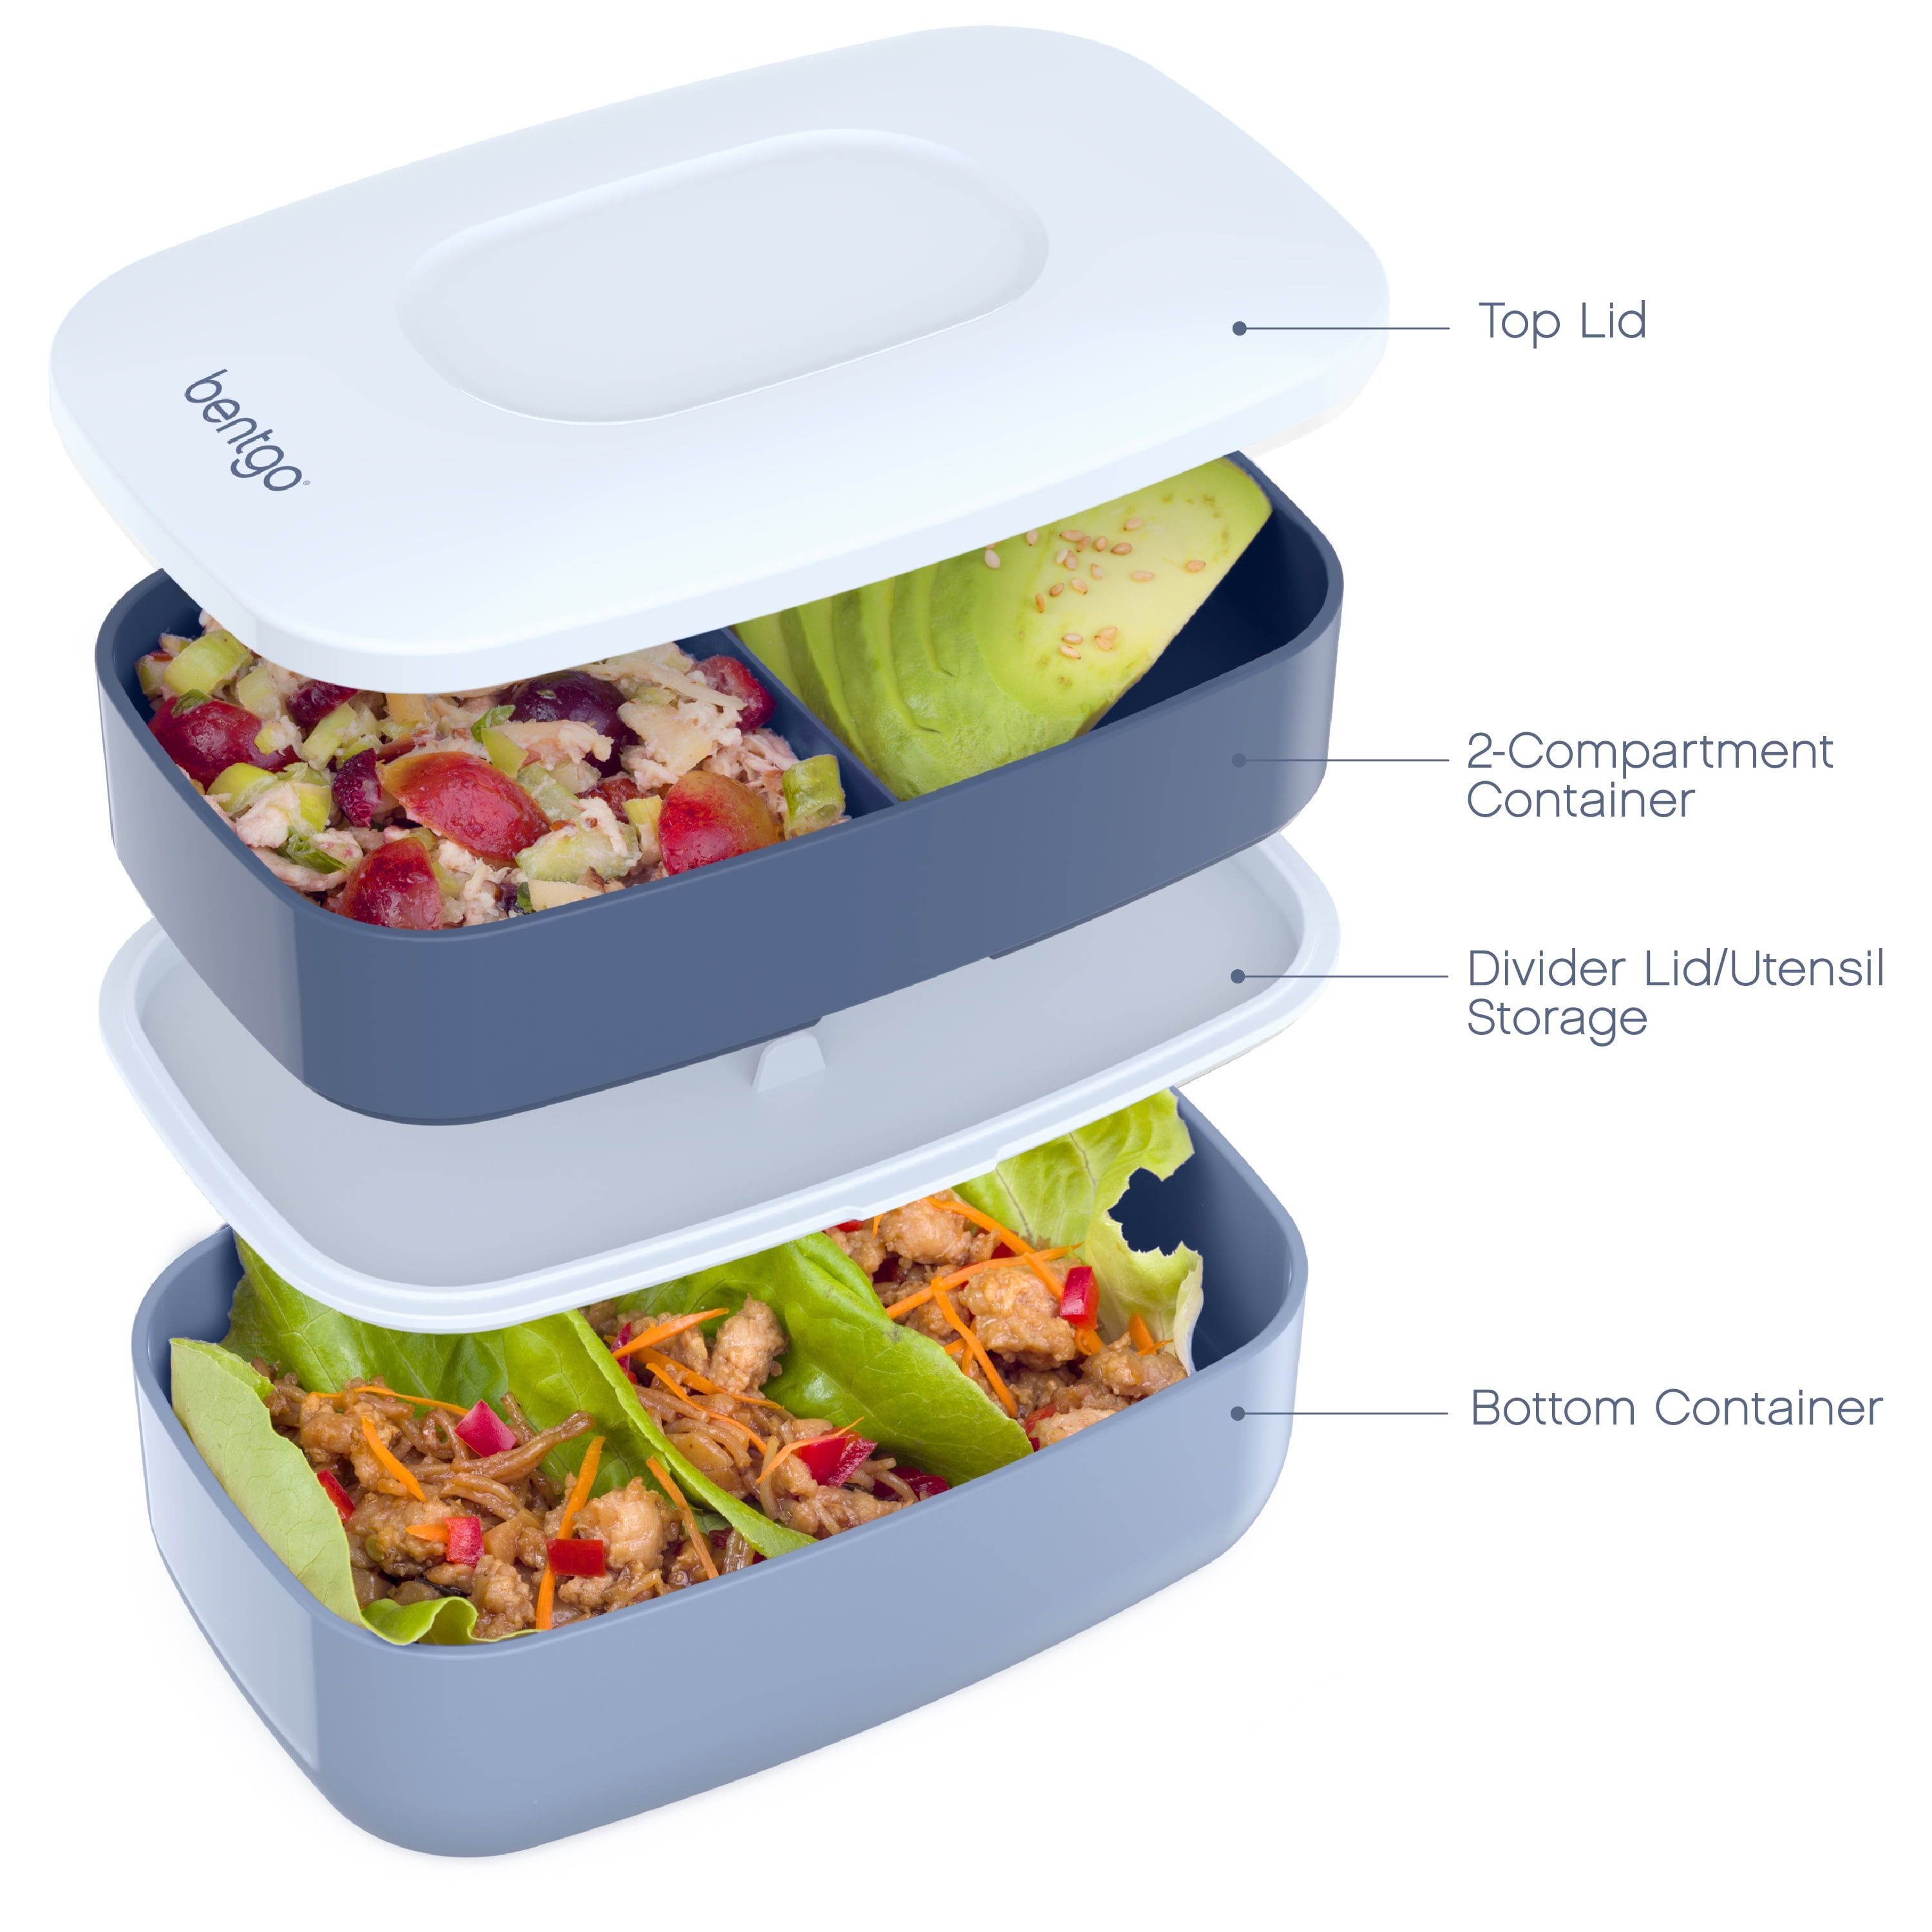 Built-in Plastic Utensil Set Sleek and Modern Bento-Style Design Includes 2 Stackable Containers Bentgo Classic and Nylon Sealing Strap Green All-in-One Stackable Bento Lunch Box Container 